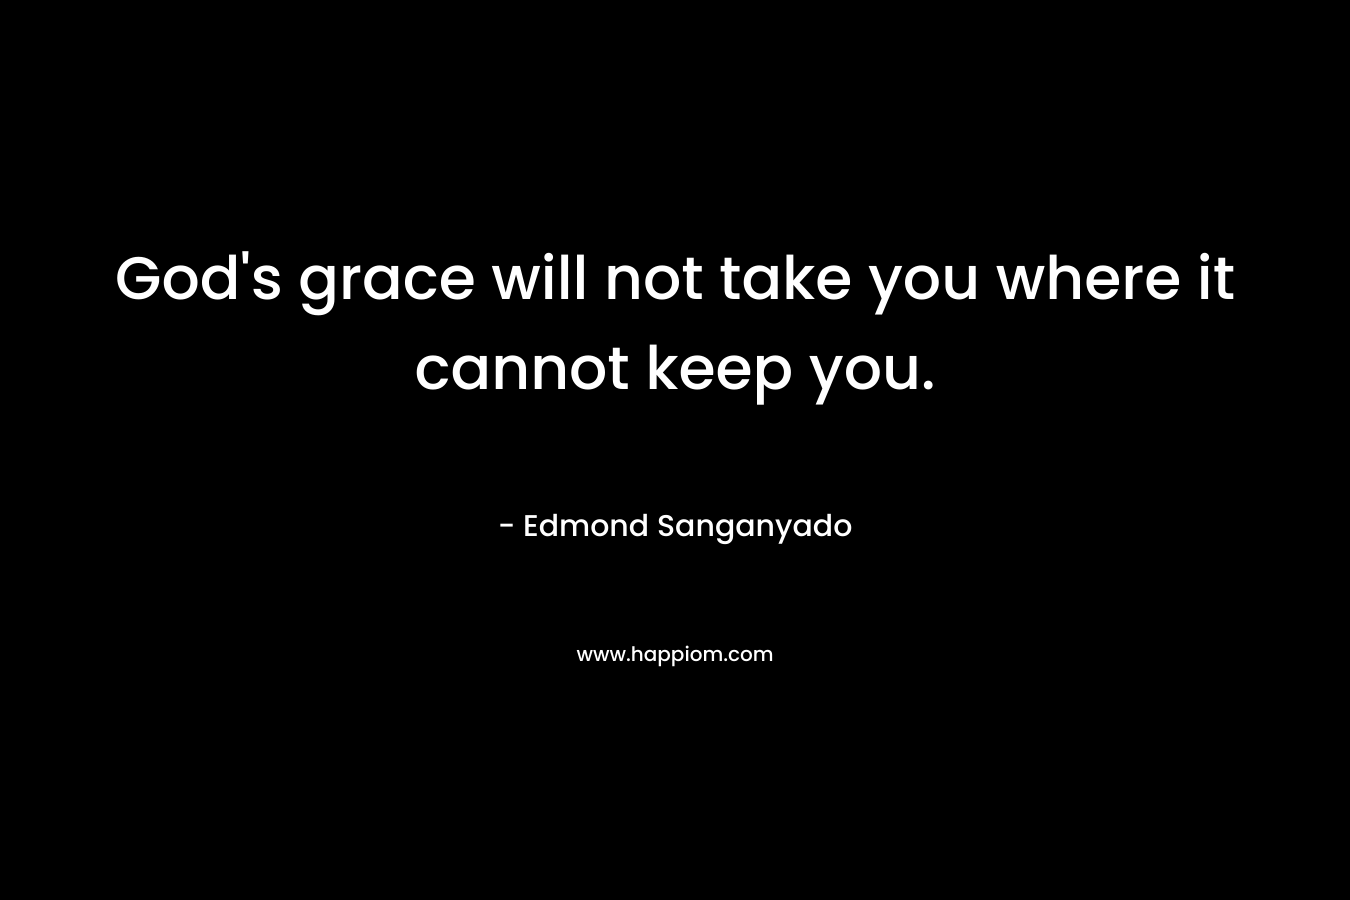 God's grace will not take you where it cannot keep you.